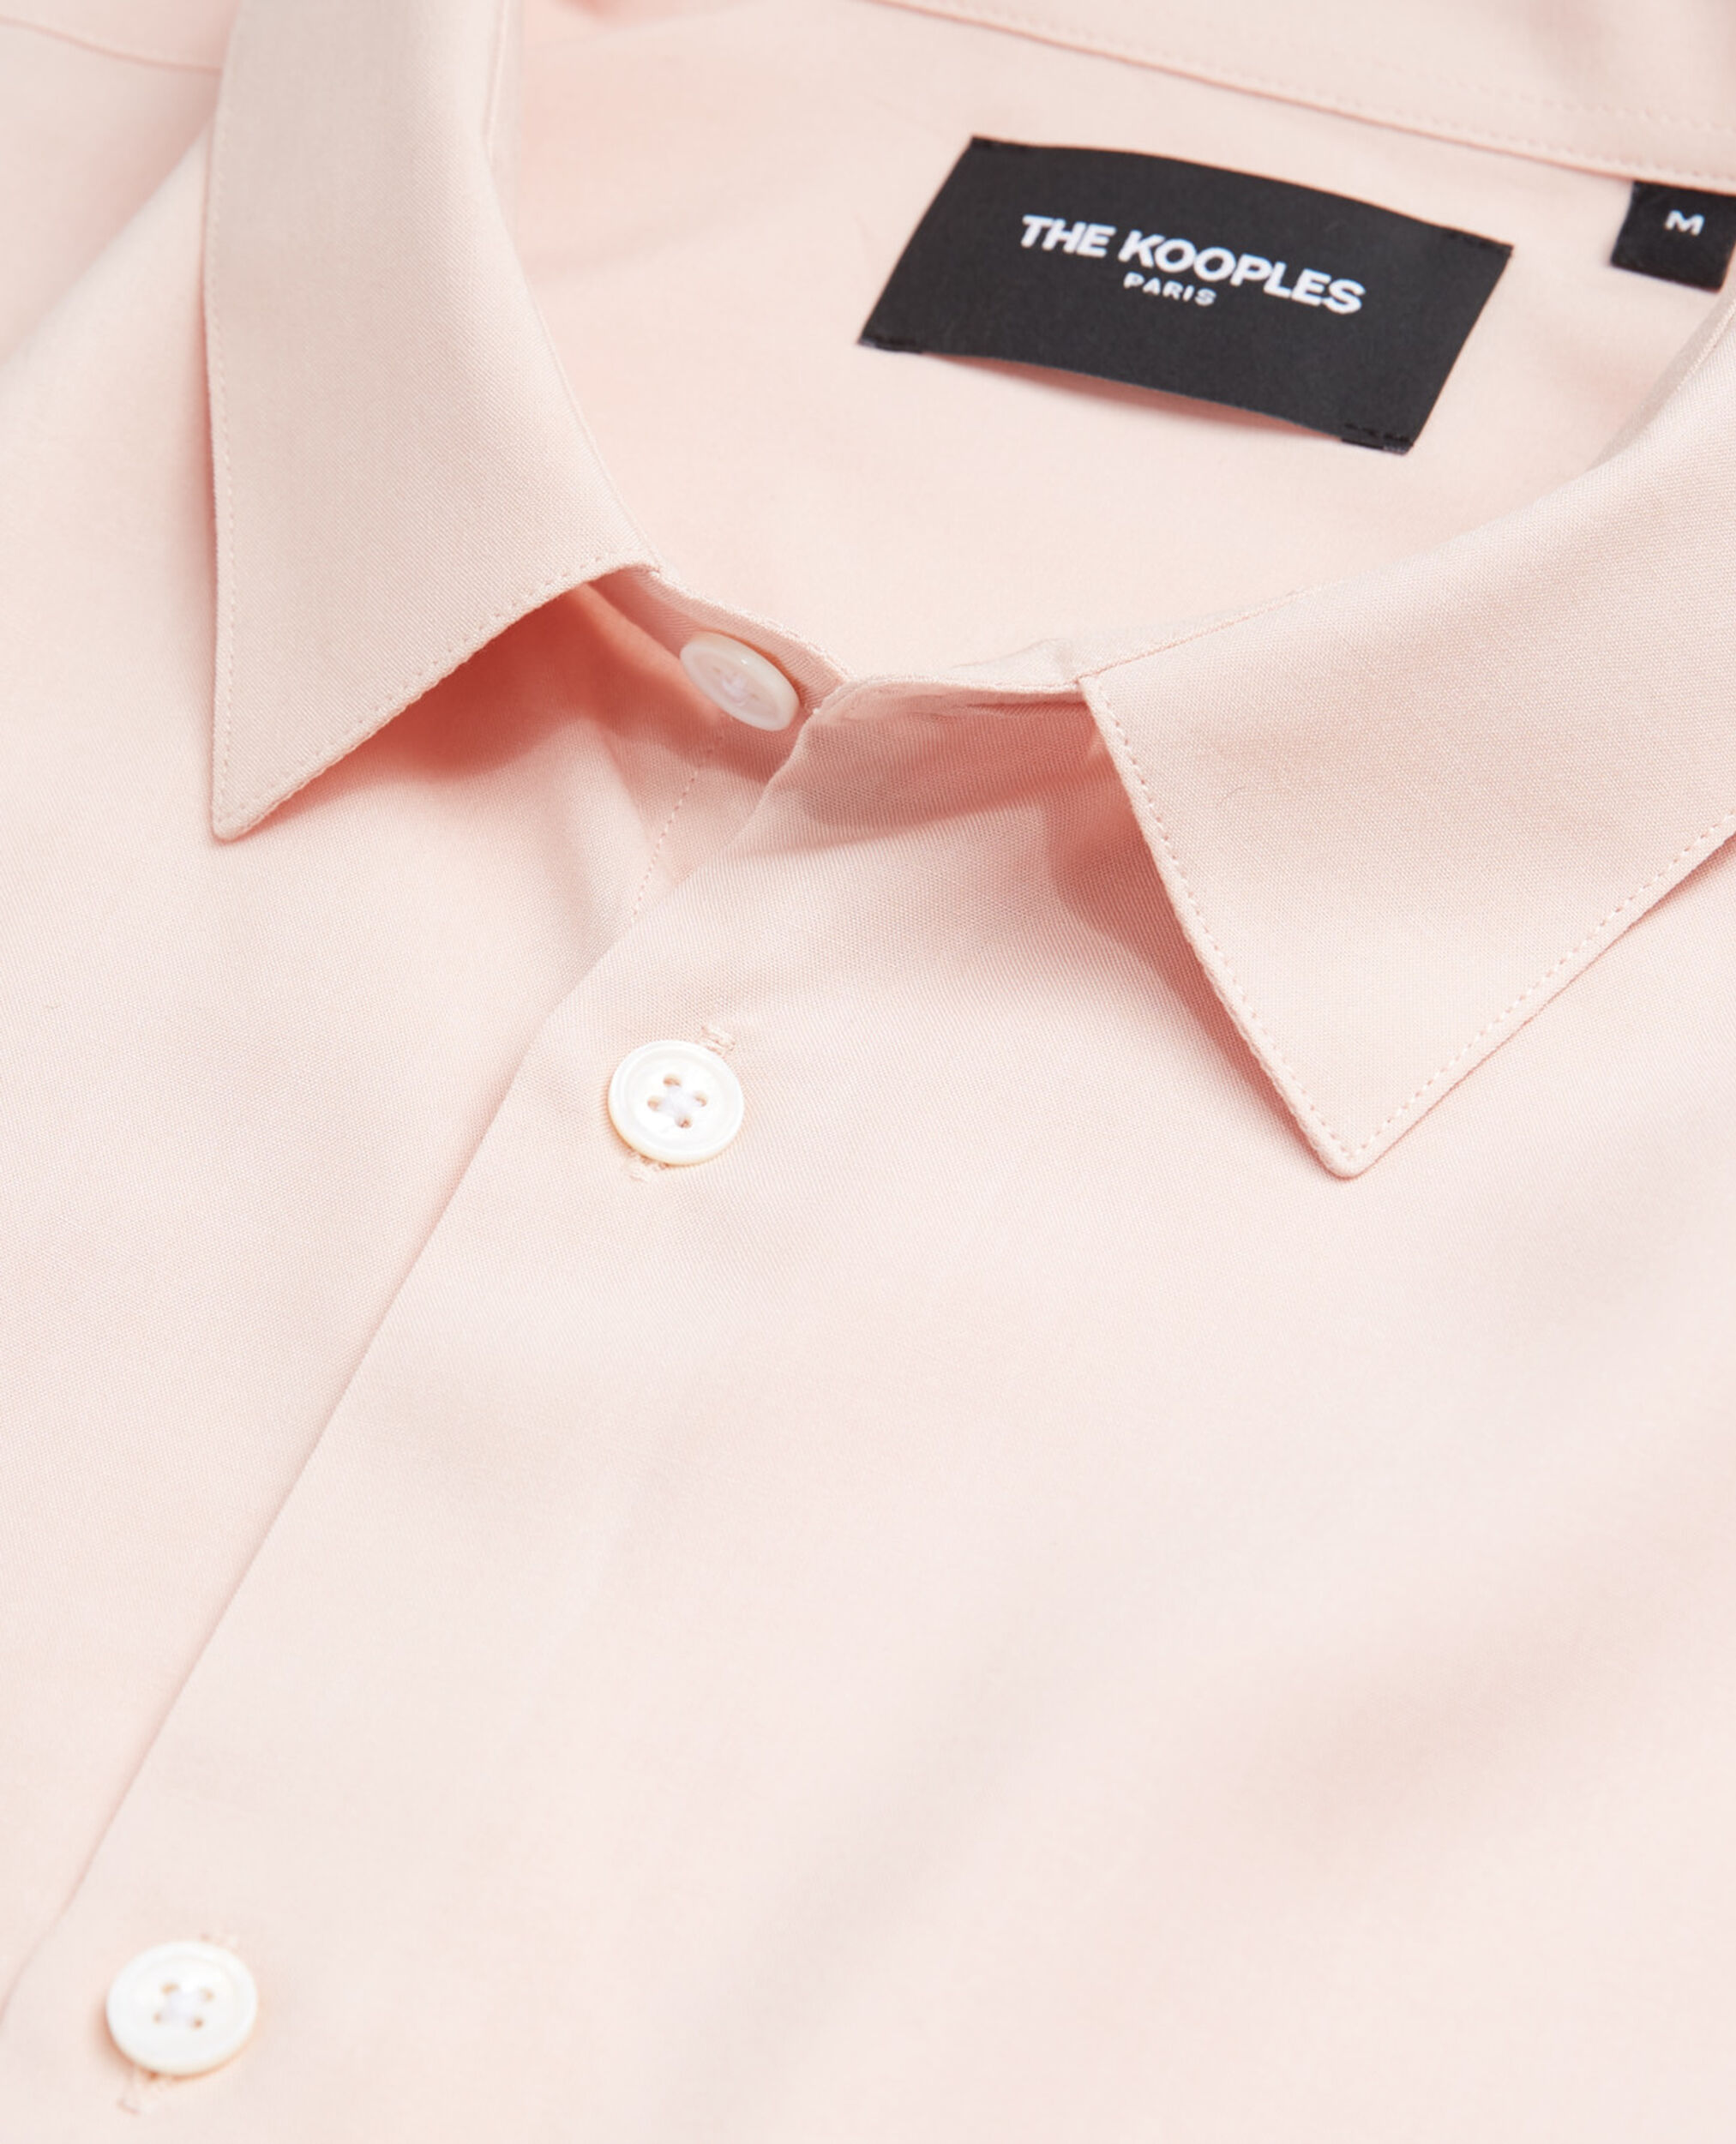 Loose-fitting pink shirt with short sleeves, PINK, hi-res image number null